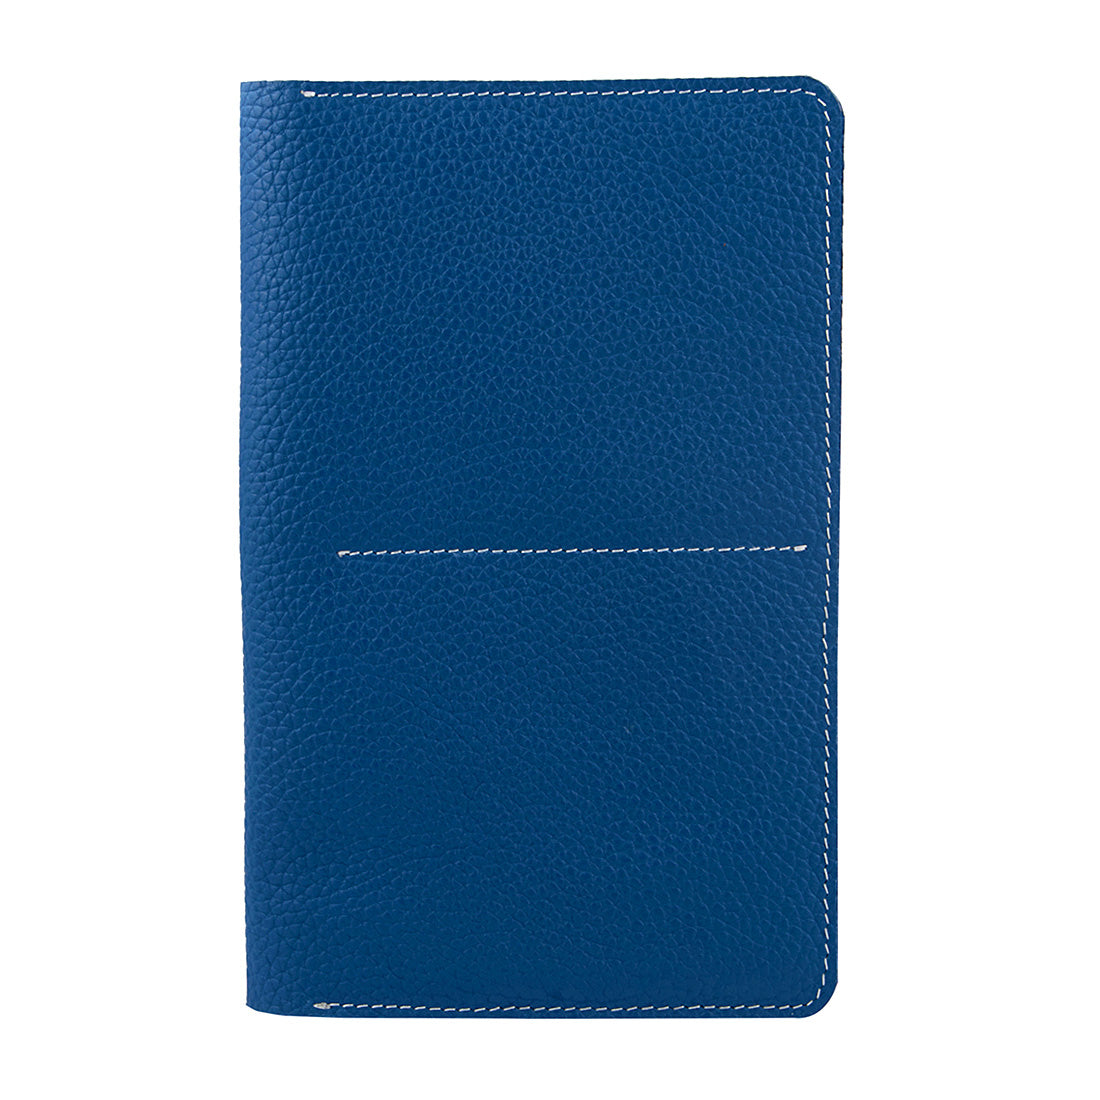 Genuine Grainy Leather Navy Blue Compact Multi-purpose For Unisex